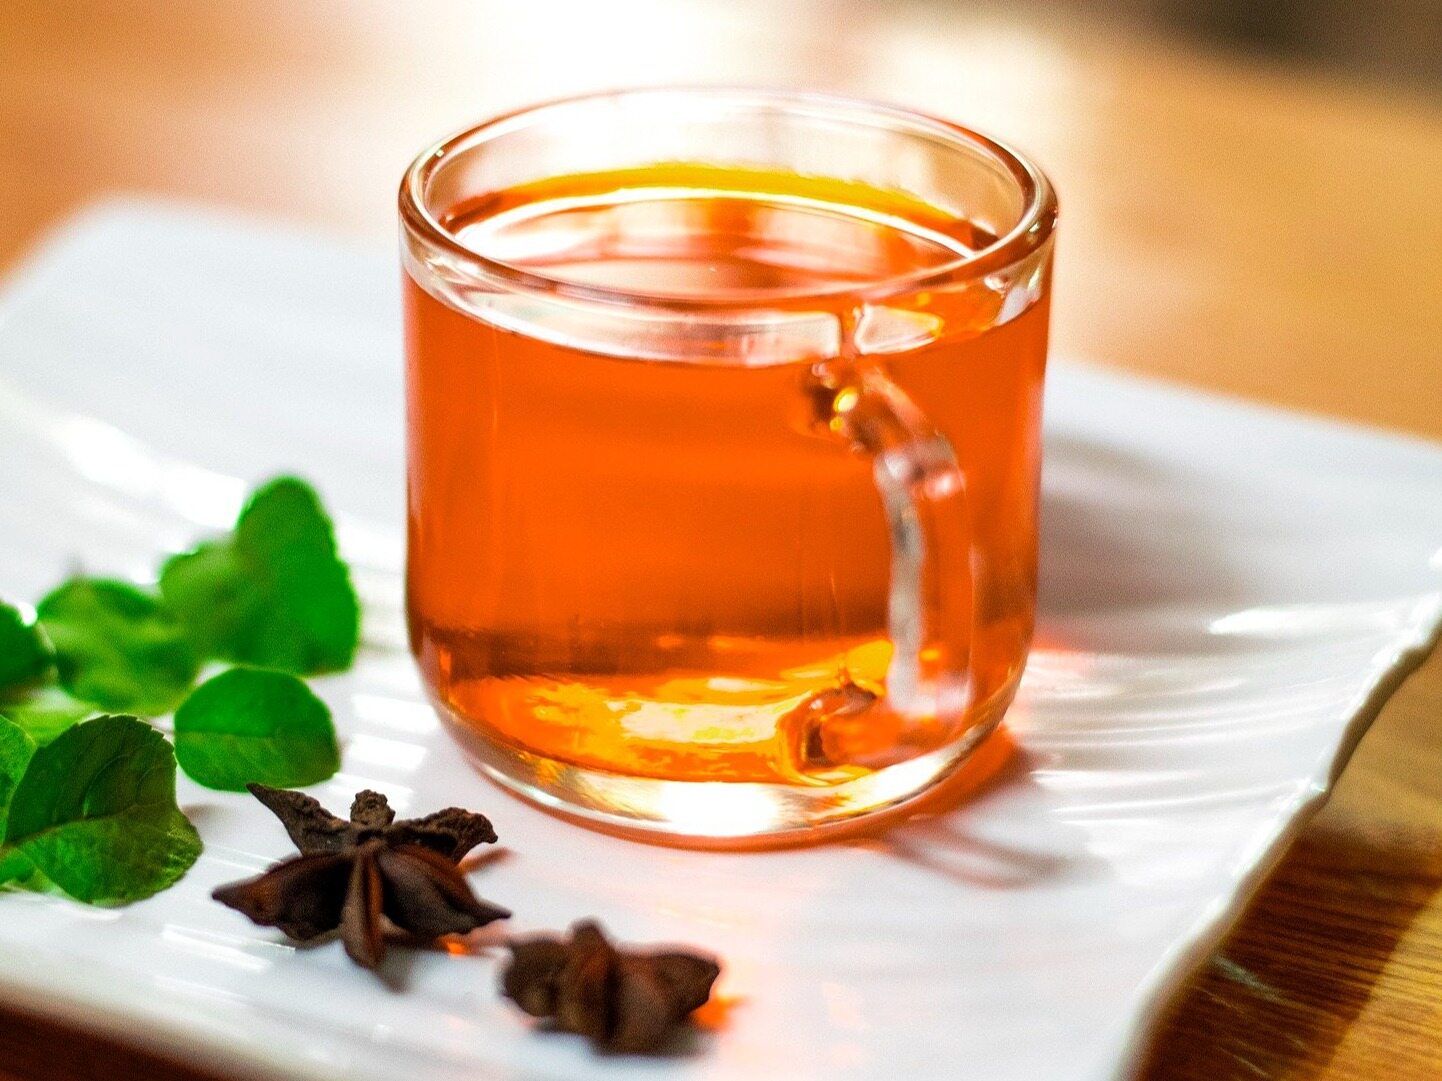 Drink anise tea.  It's good for digestion